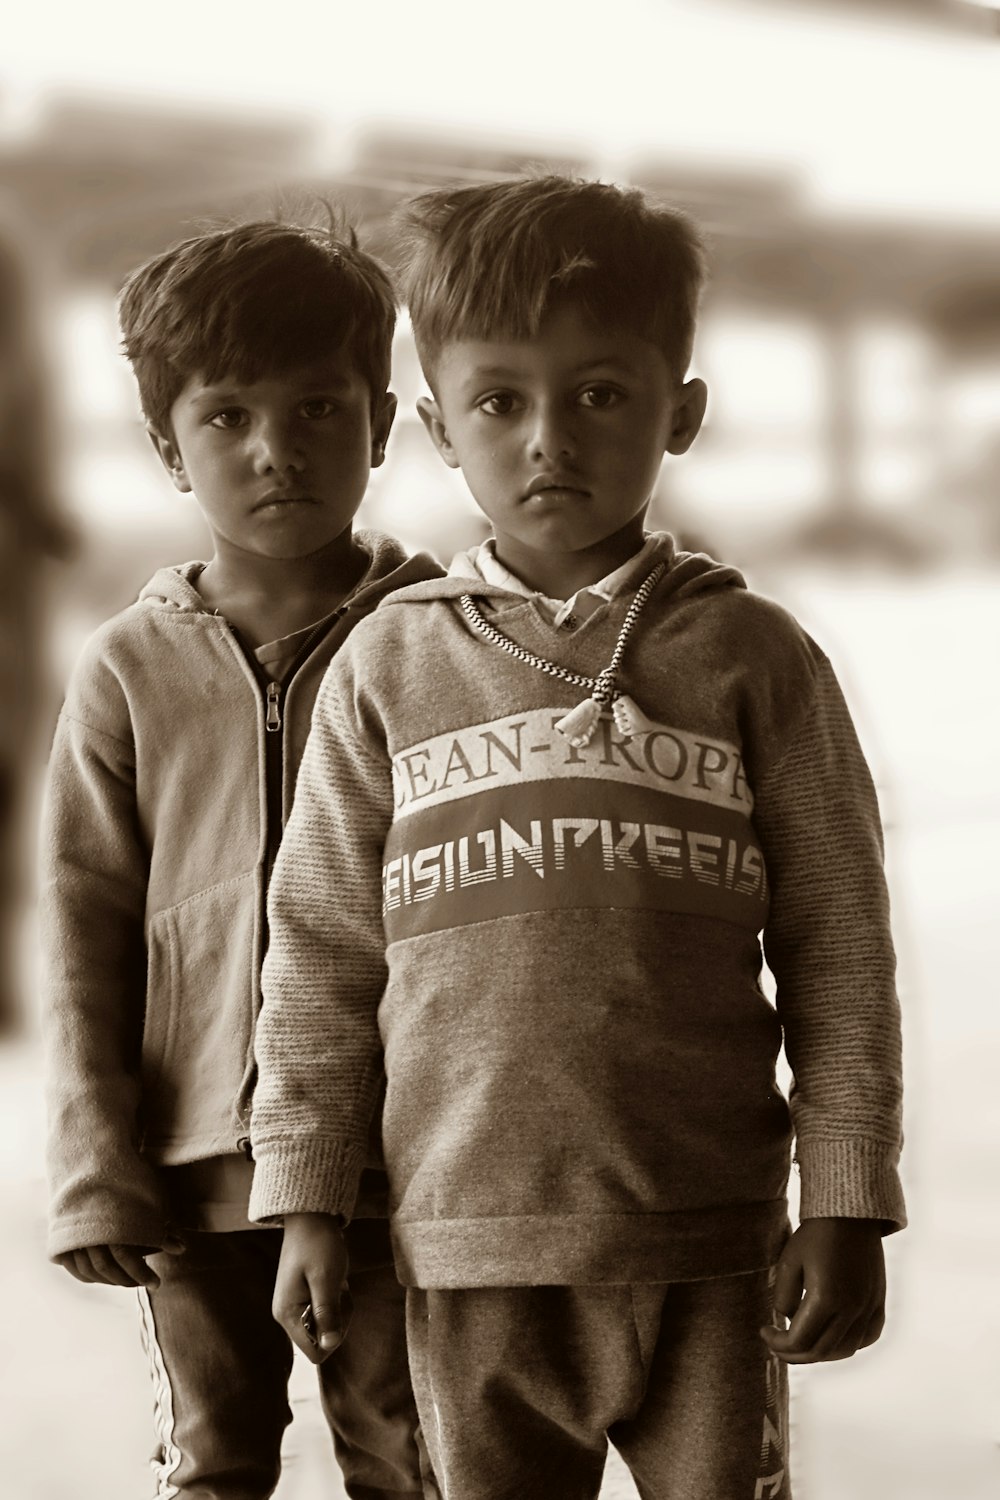 two young boys standing next to each other